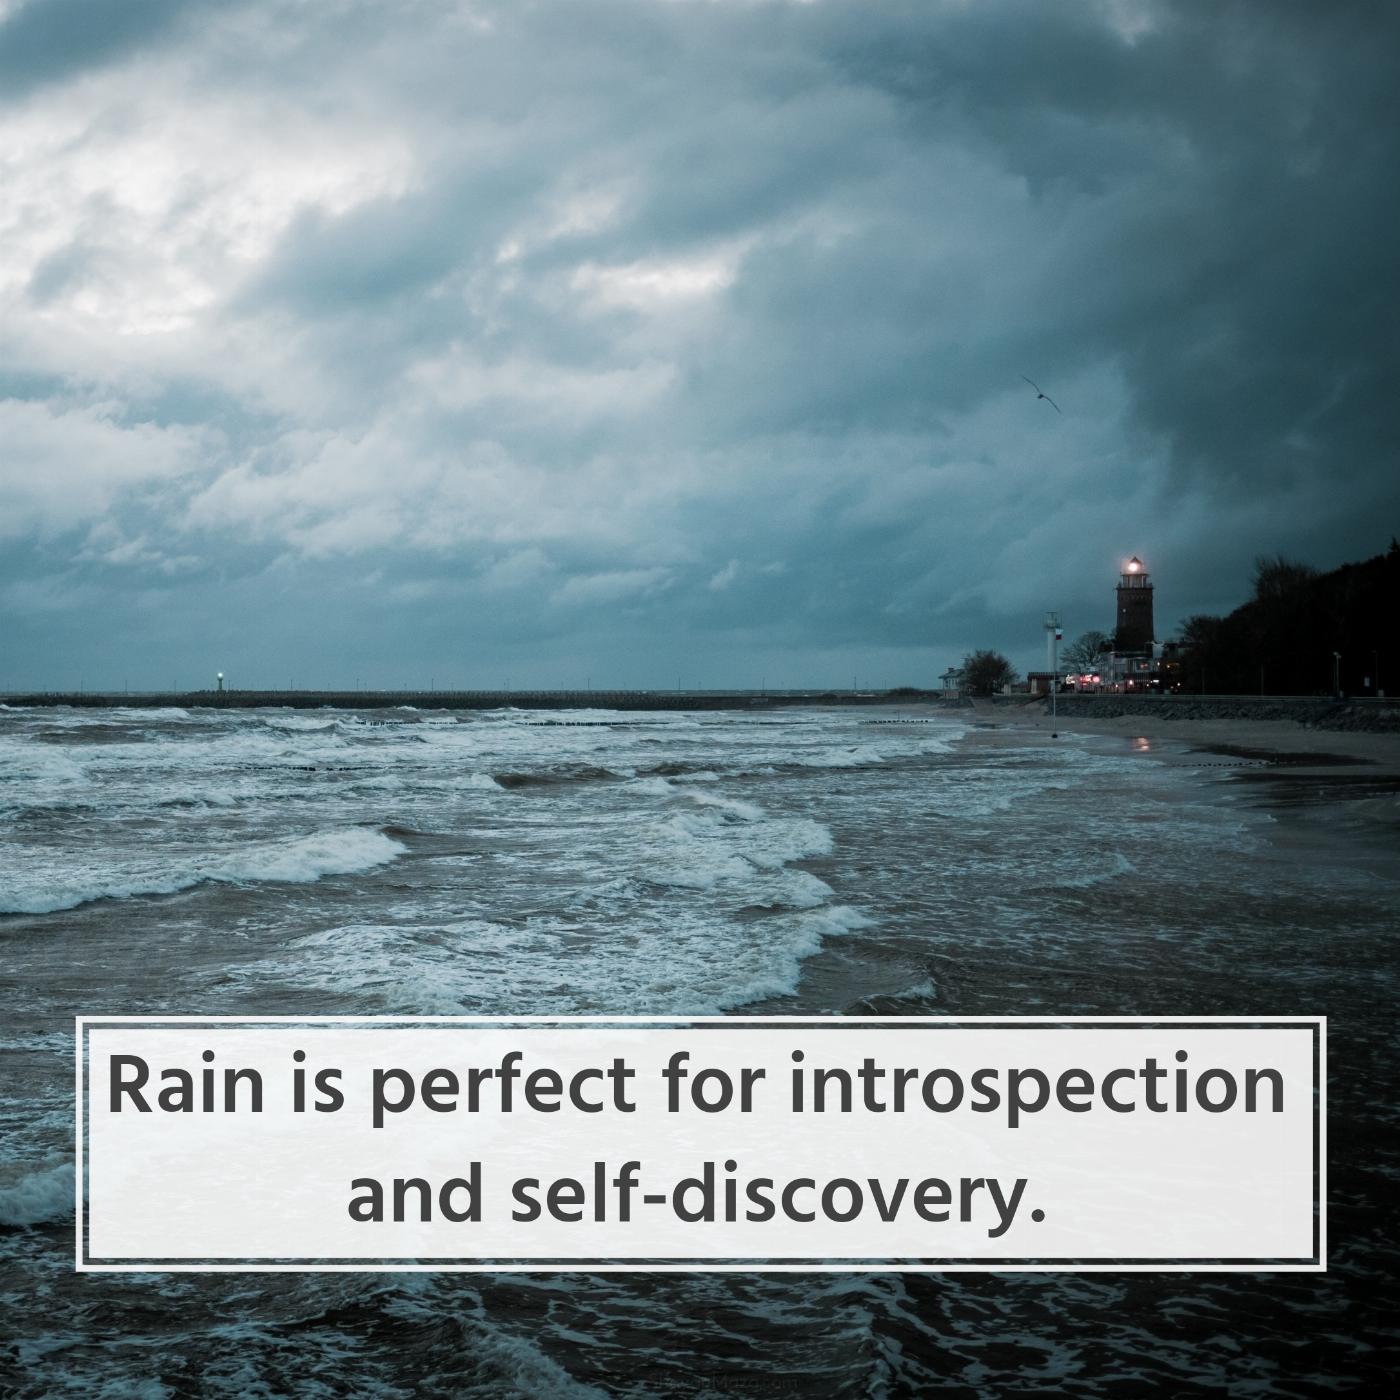 Rain is perfect for introspection and self-discovery